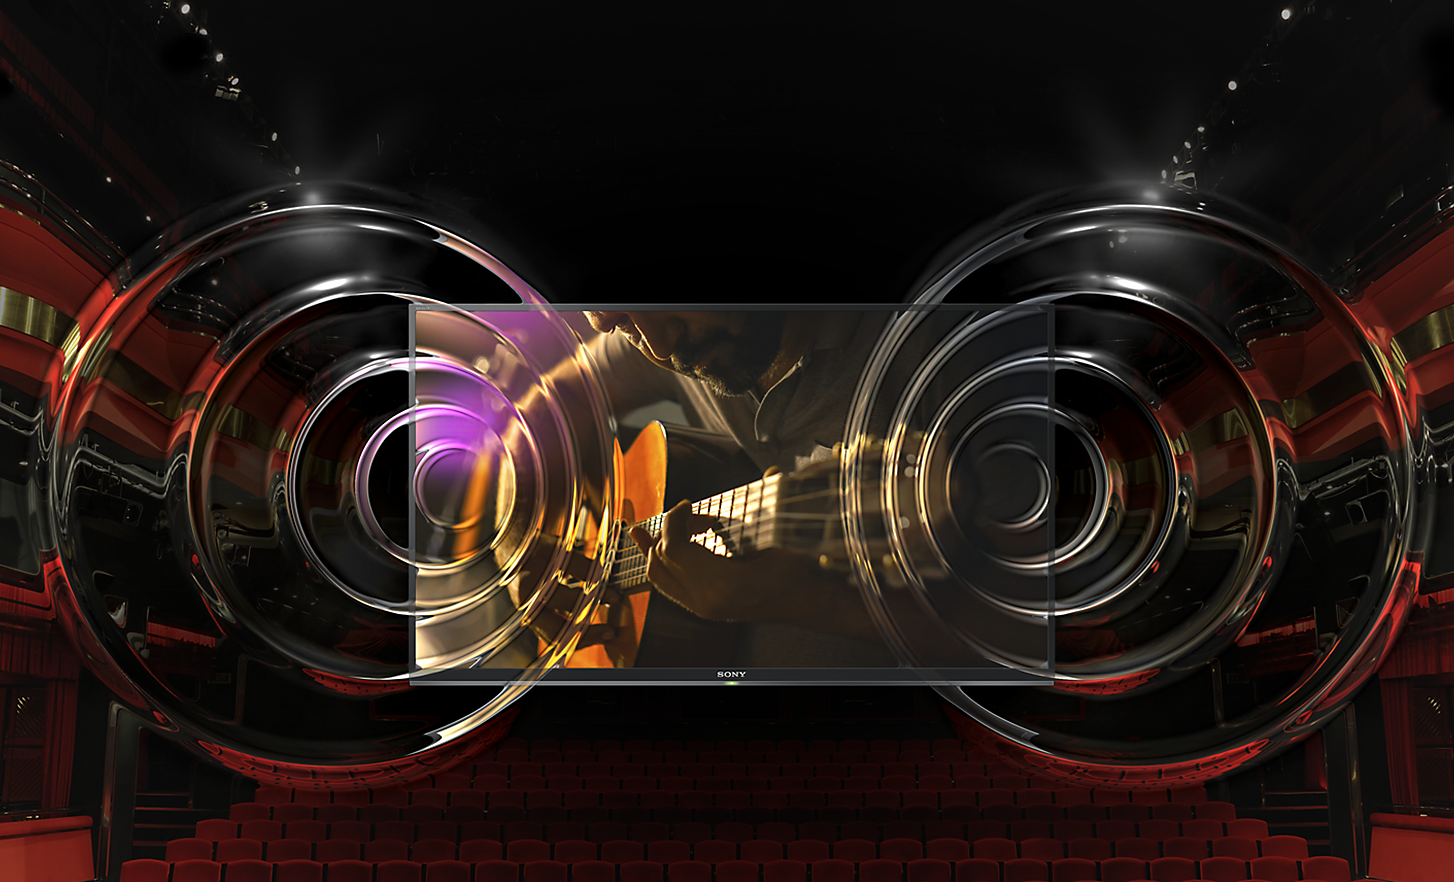 BRAVIA TV with screenshot of man playing a guitar and two concentric sound rings projecting out from the TV